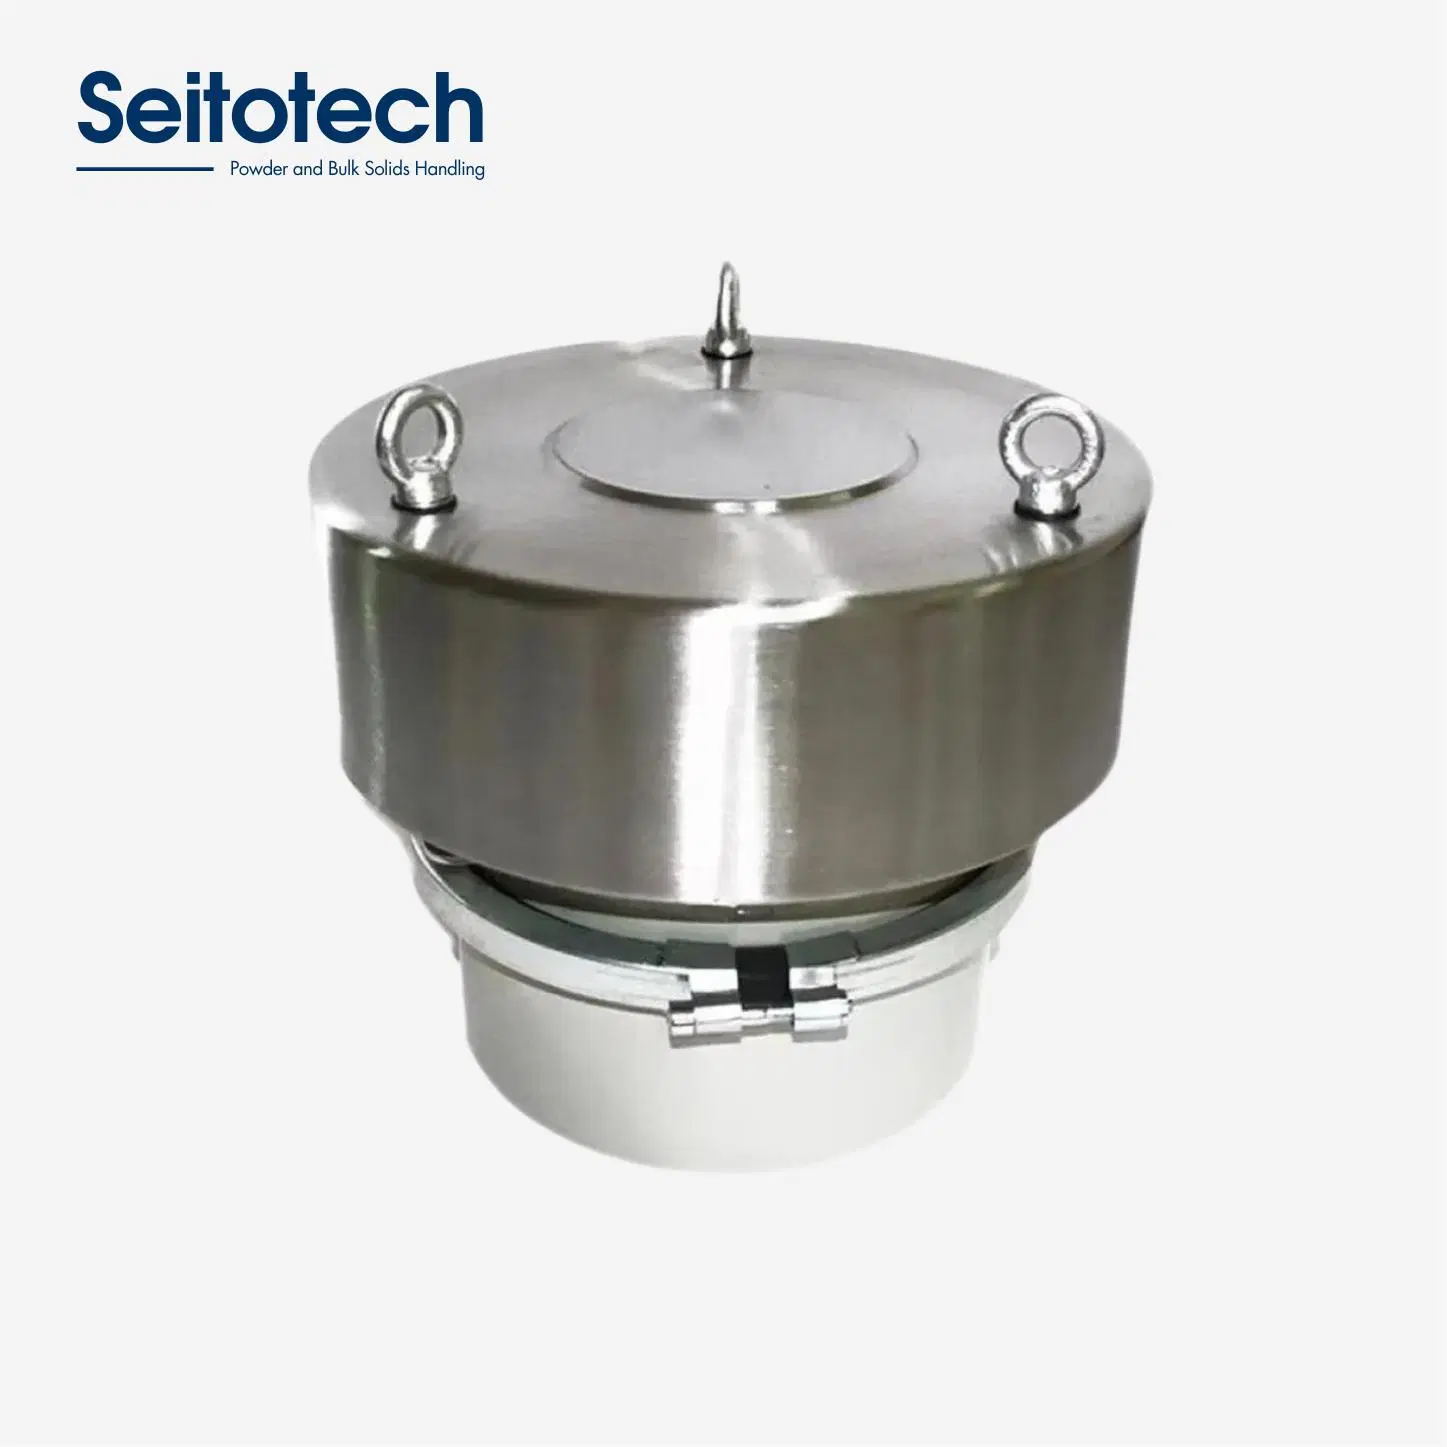 Pressure Relief Valve for Cement Silo Other Industrial Filtration Equipment Safety Valve Exhaust Valve